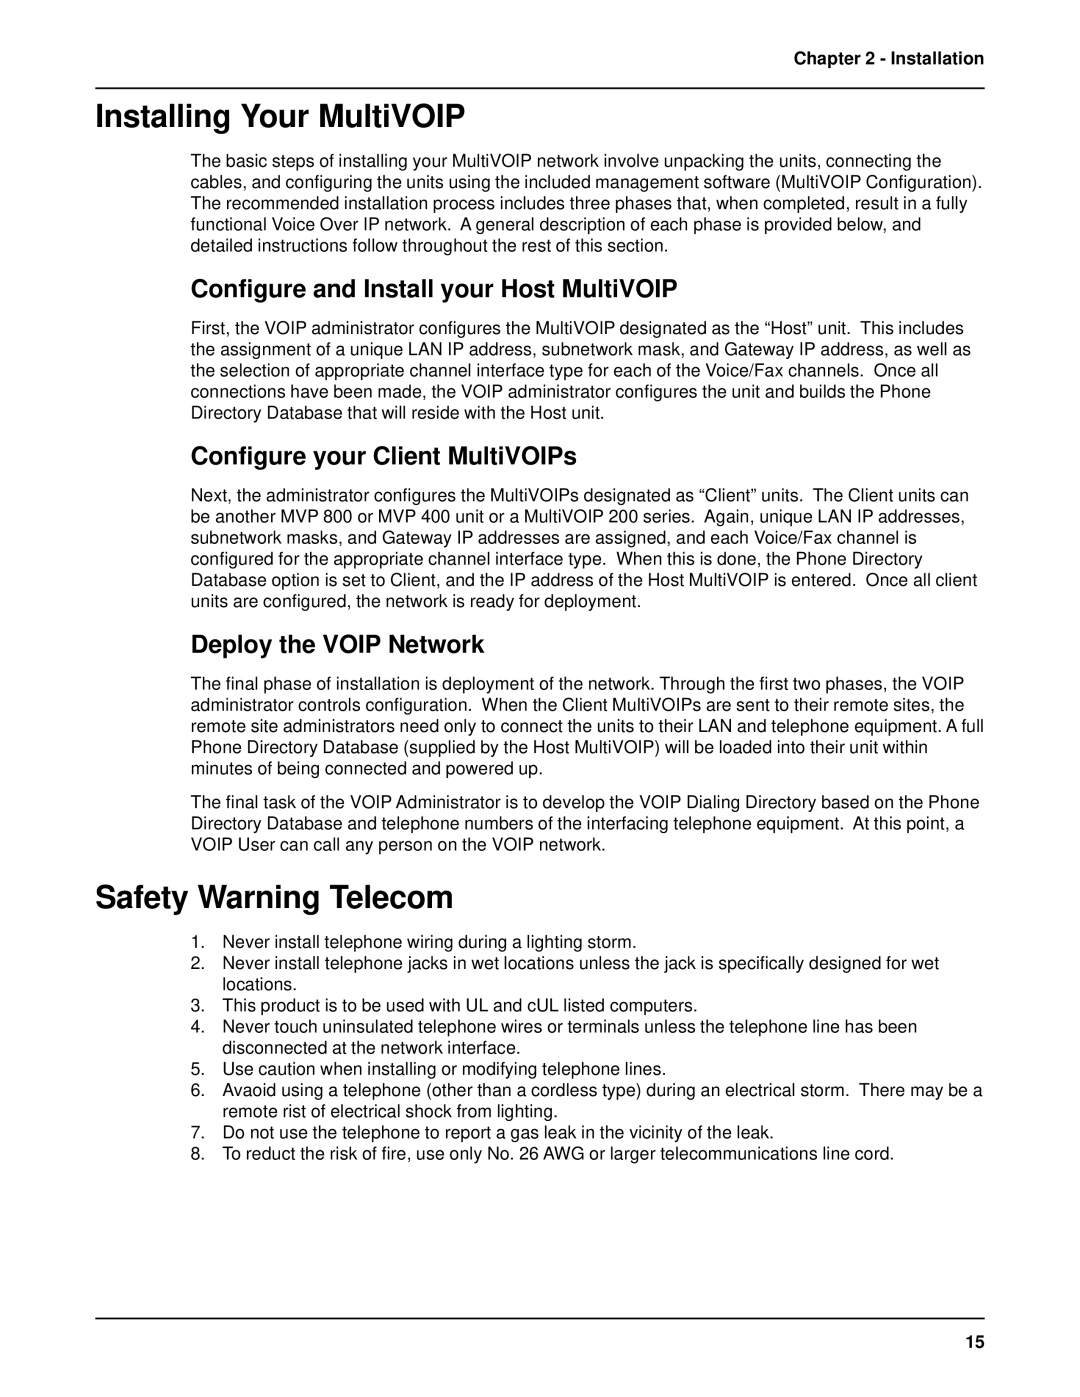 Multi-Tech Systems MVP 800 Installing Your MultiVOIP, Safety Warning Telecom, Configure and Install your Host MultiVOIP 